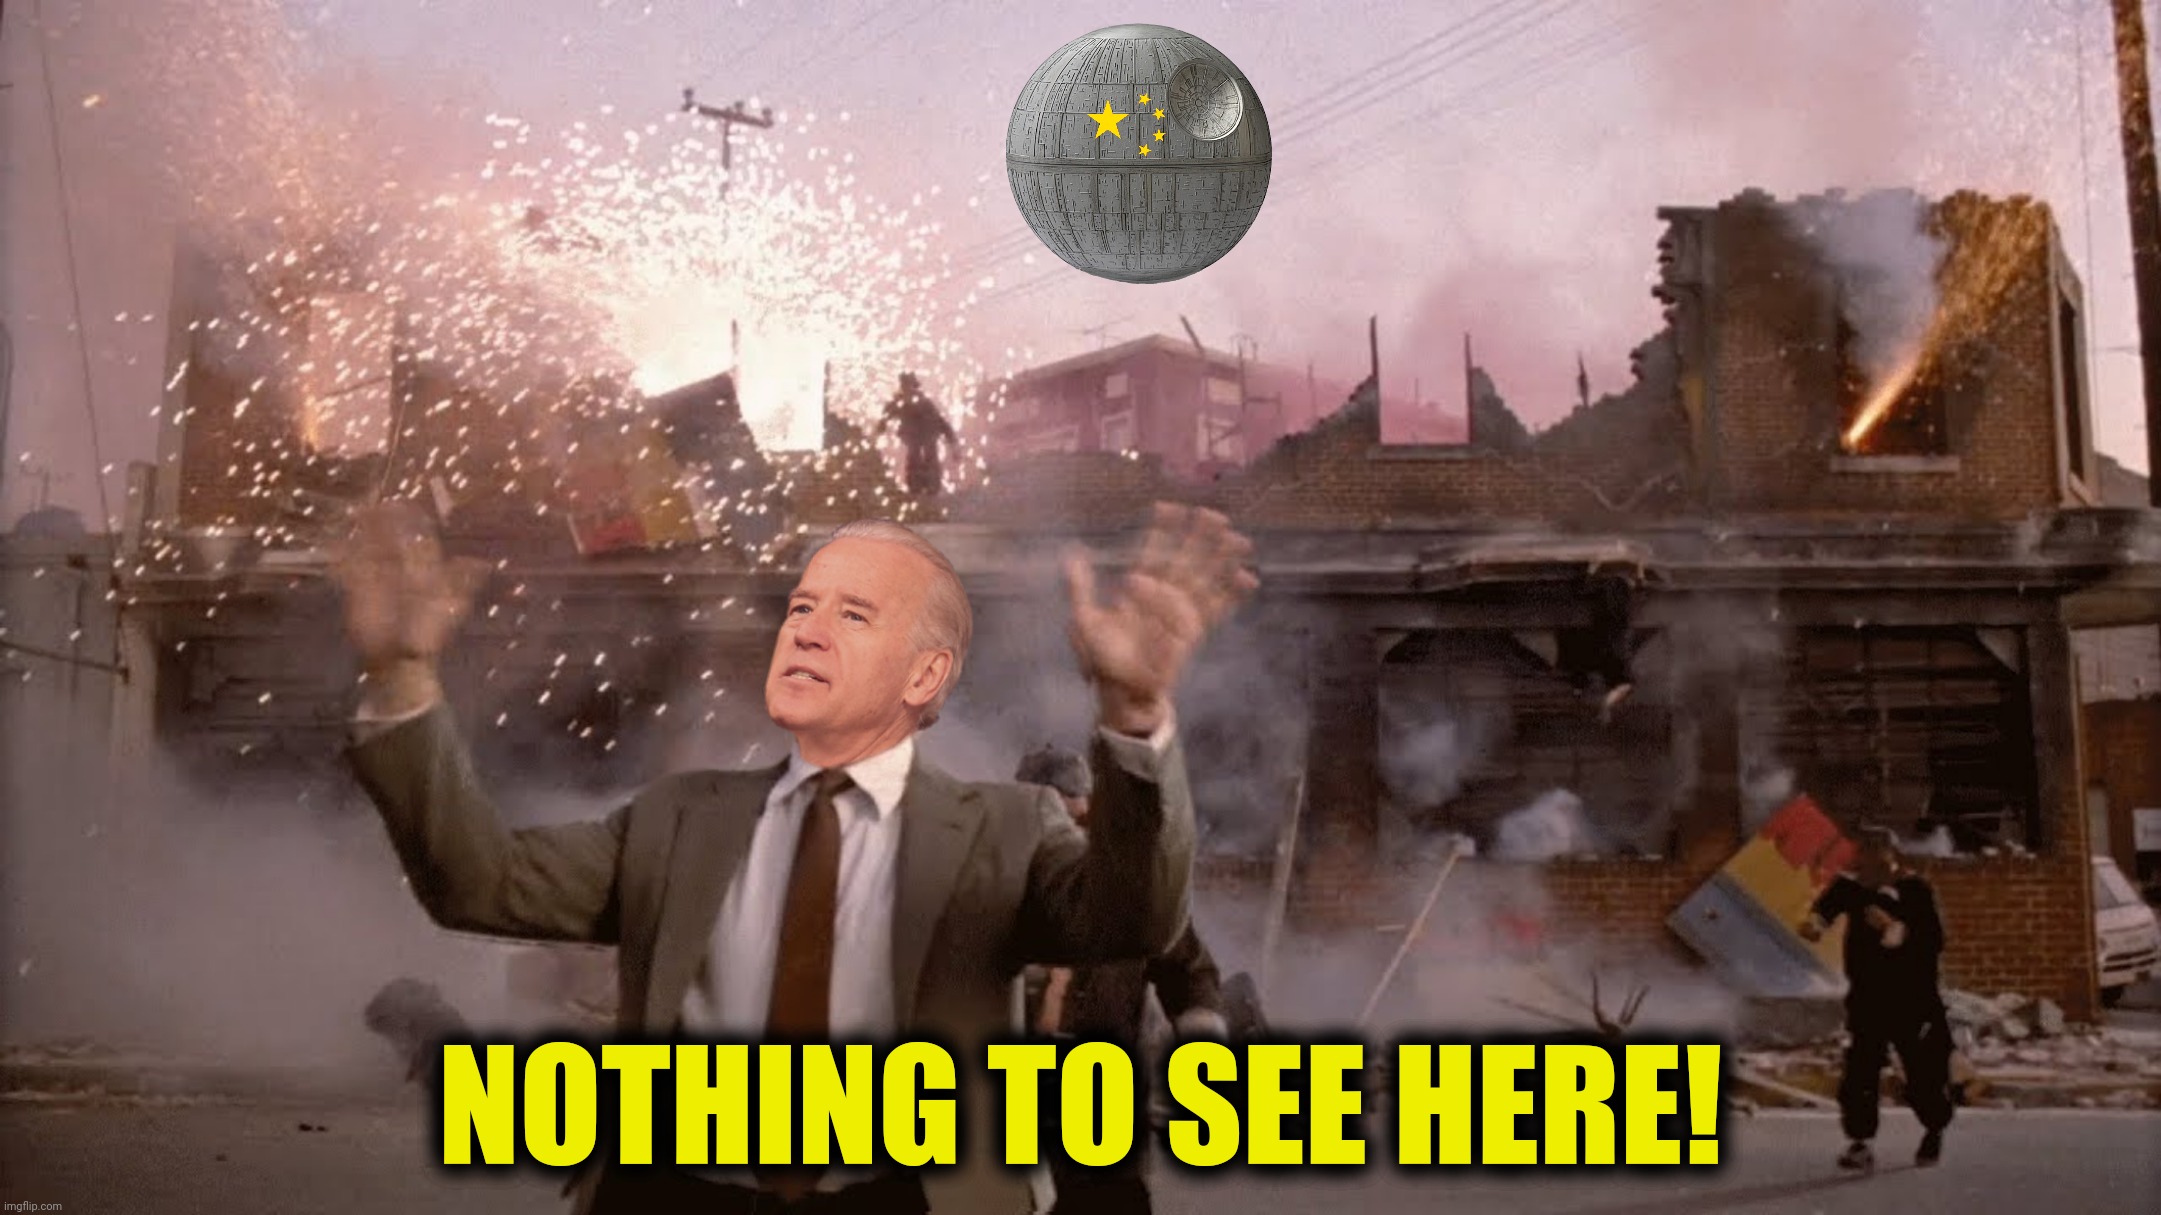 That's no moon! | NOTHING TO SEE HERE! | image tagged in bad photoshop,joe biden,naked gun,death star,china | made w/ Imgflip meme maker